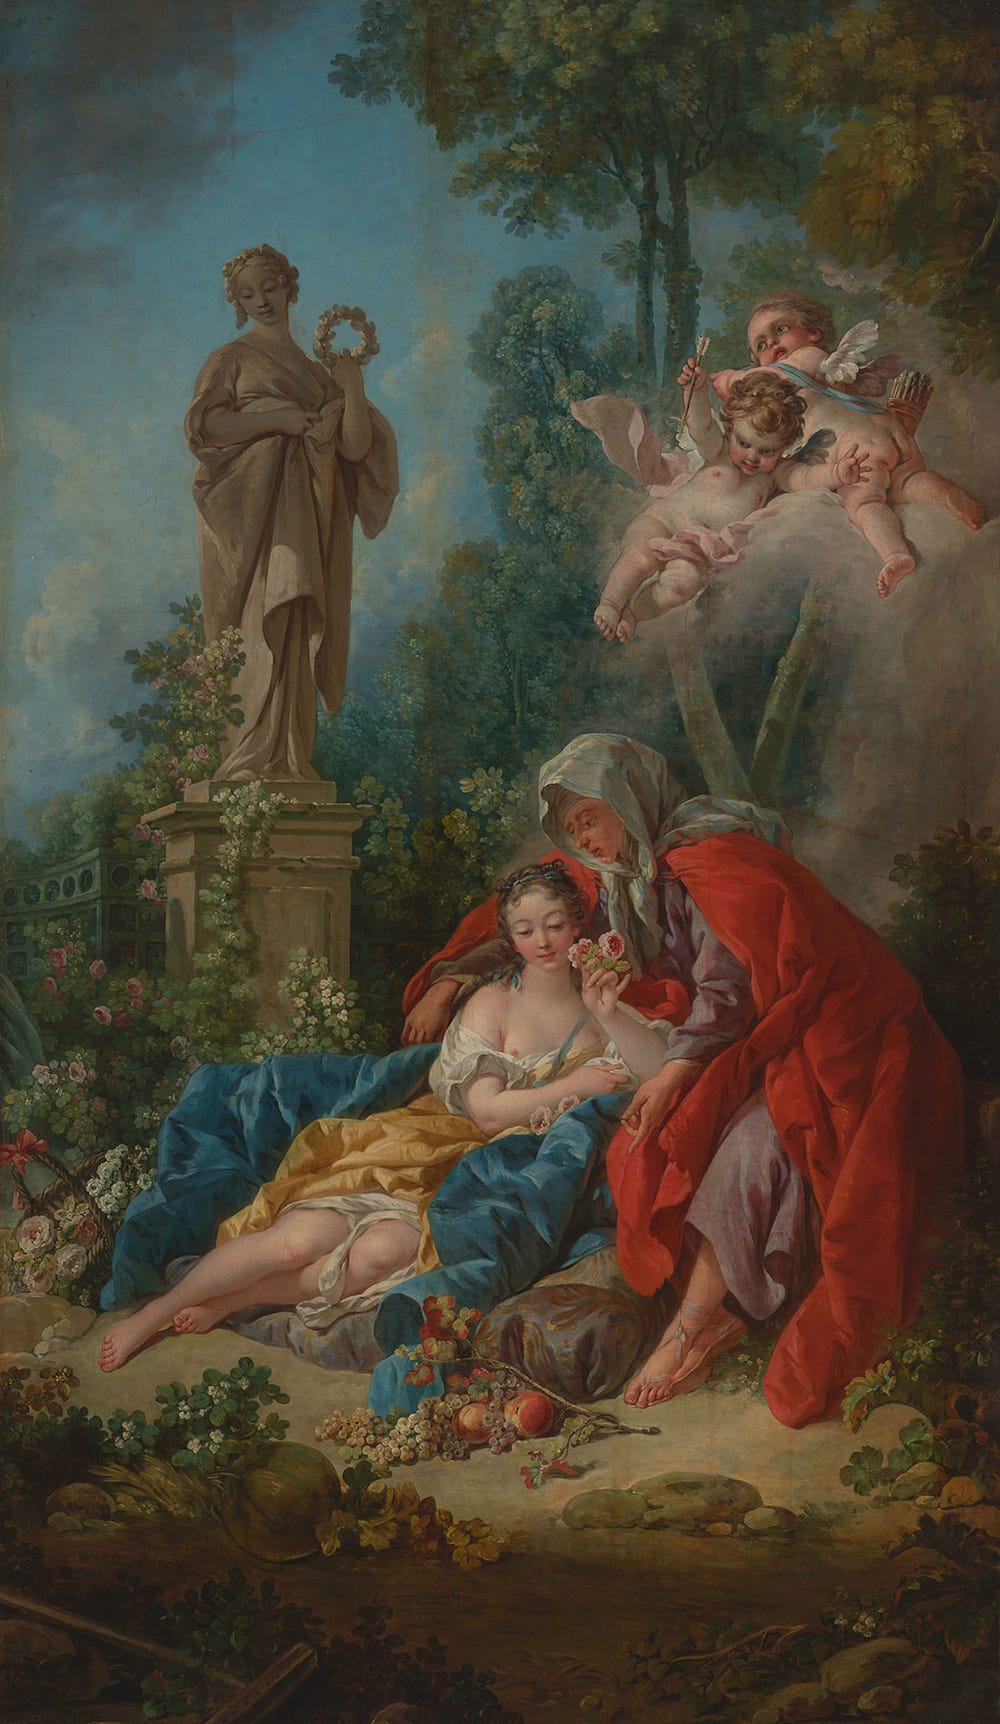 two women in brightly colored garments, one young and one old, with two cherubs above